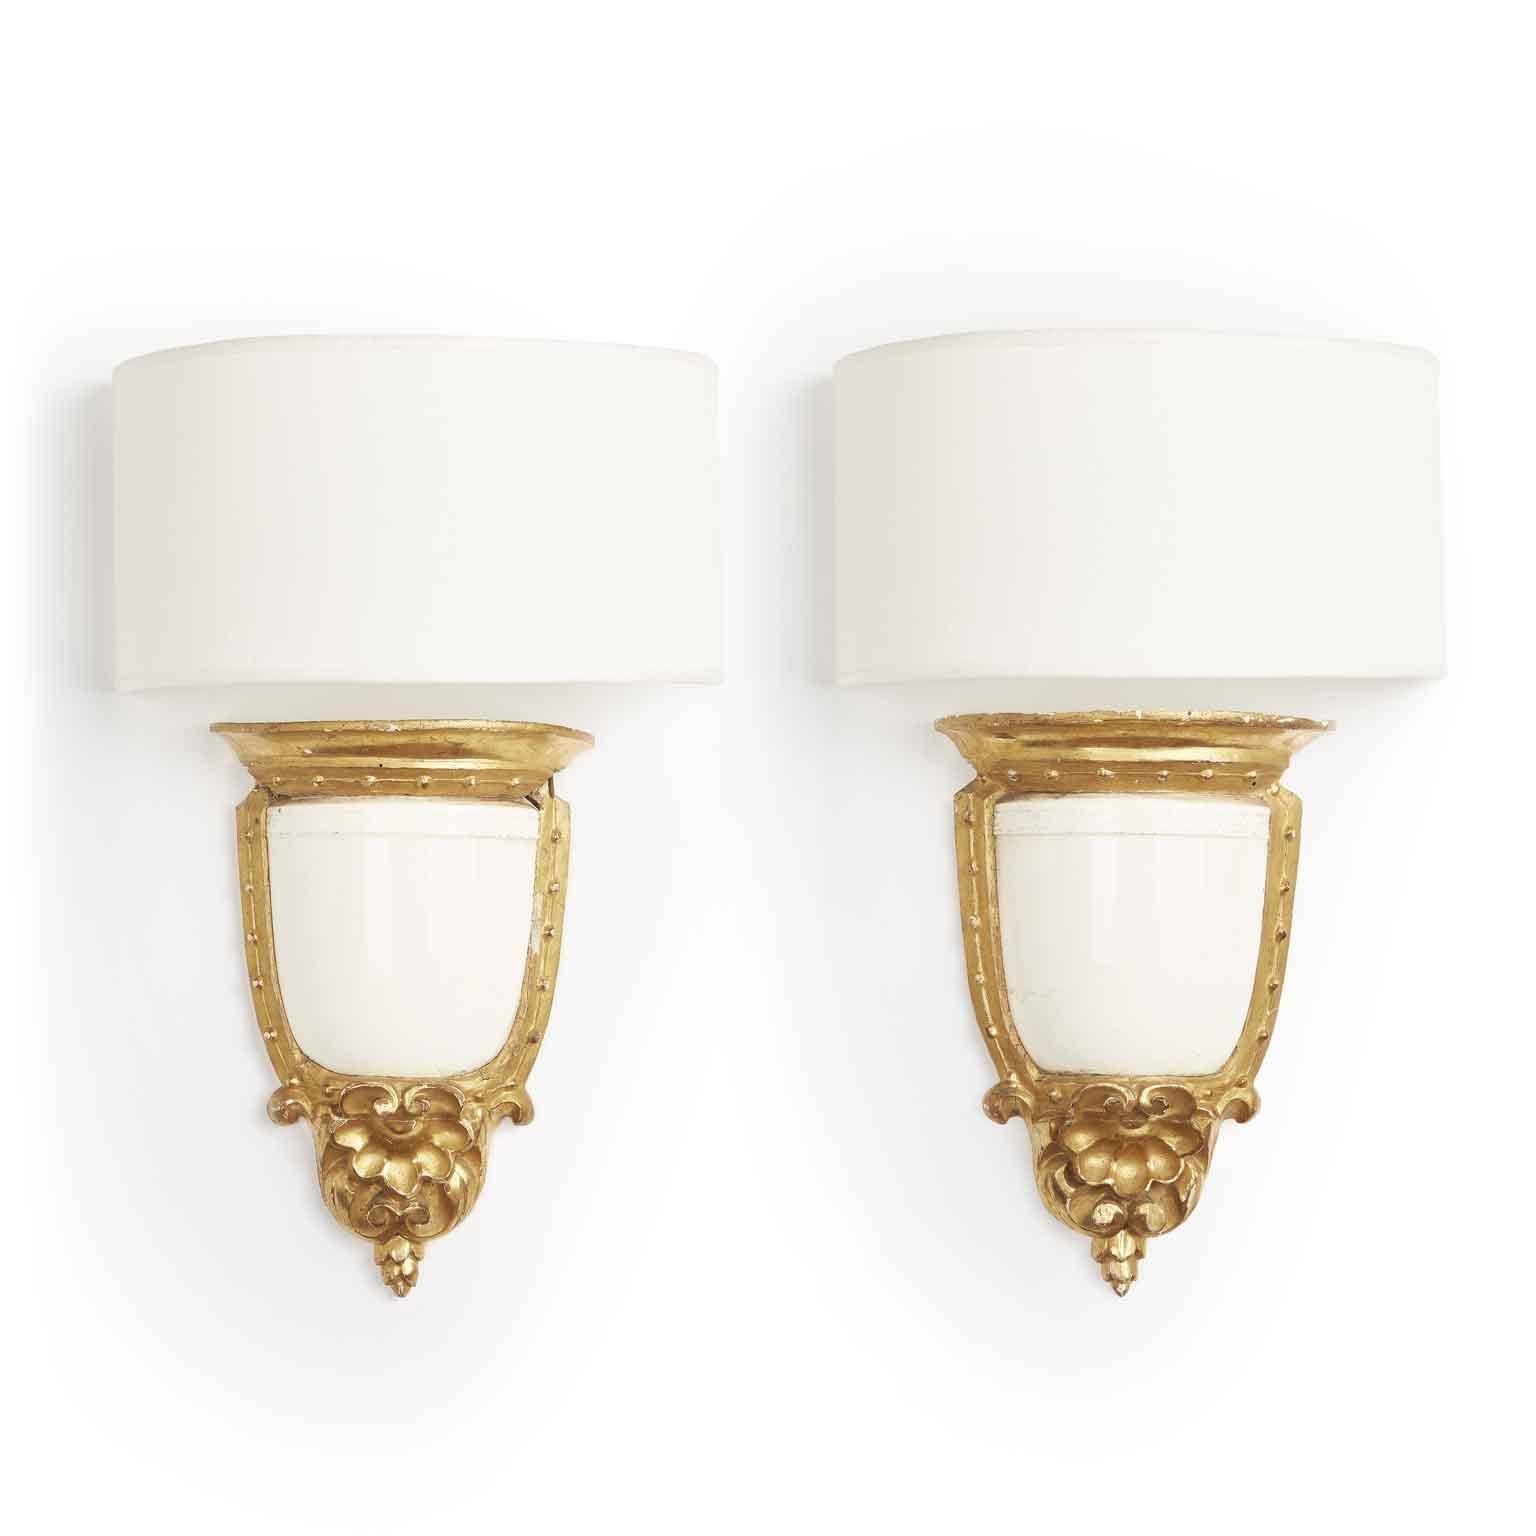 Early 19th century Neoclassical carved and gilded wall brackets realized with a white ivory color majolica demi vase of the Italian manufacture Giustiniani from Neaples. This unique and elegant pair od Italian artworks can be used as wall lights